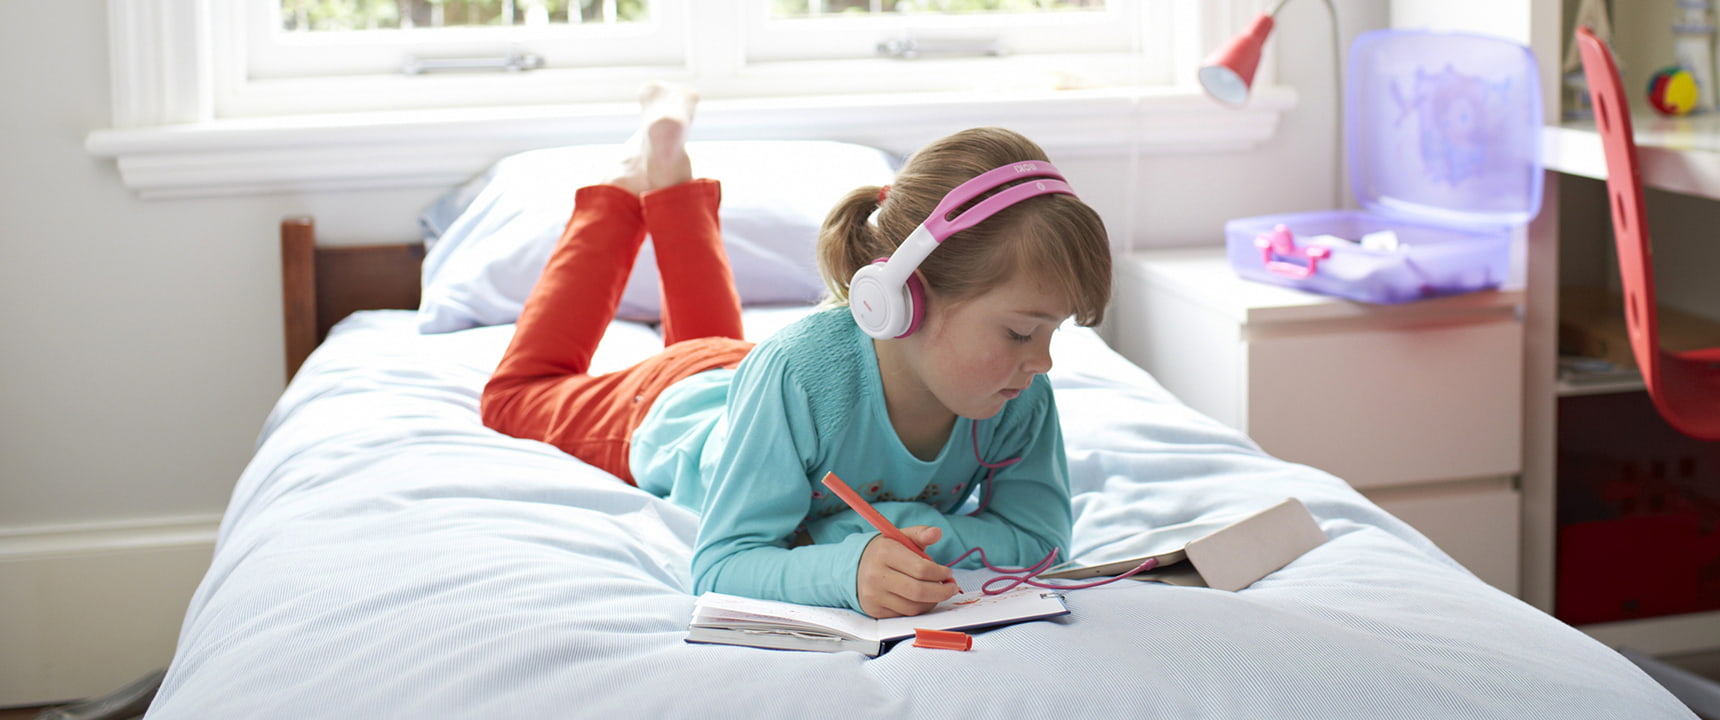 Young girl on her bed watches iPad with headphones using Telstra ADSL internet